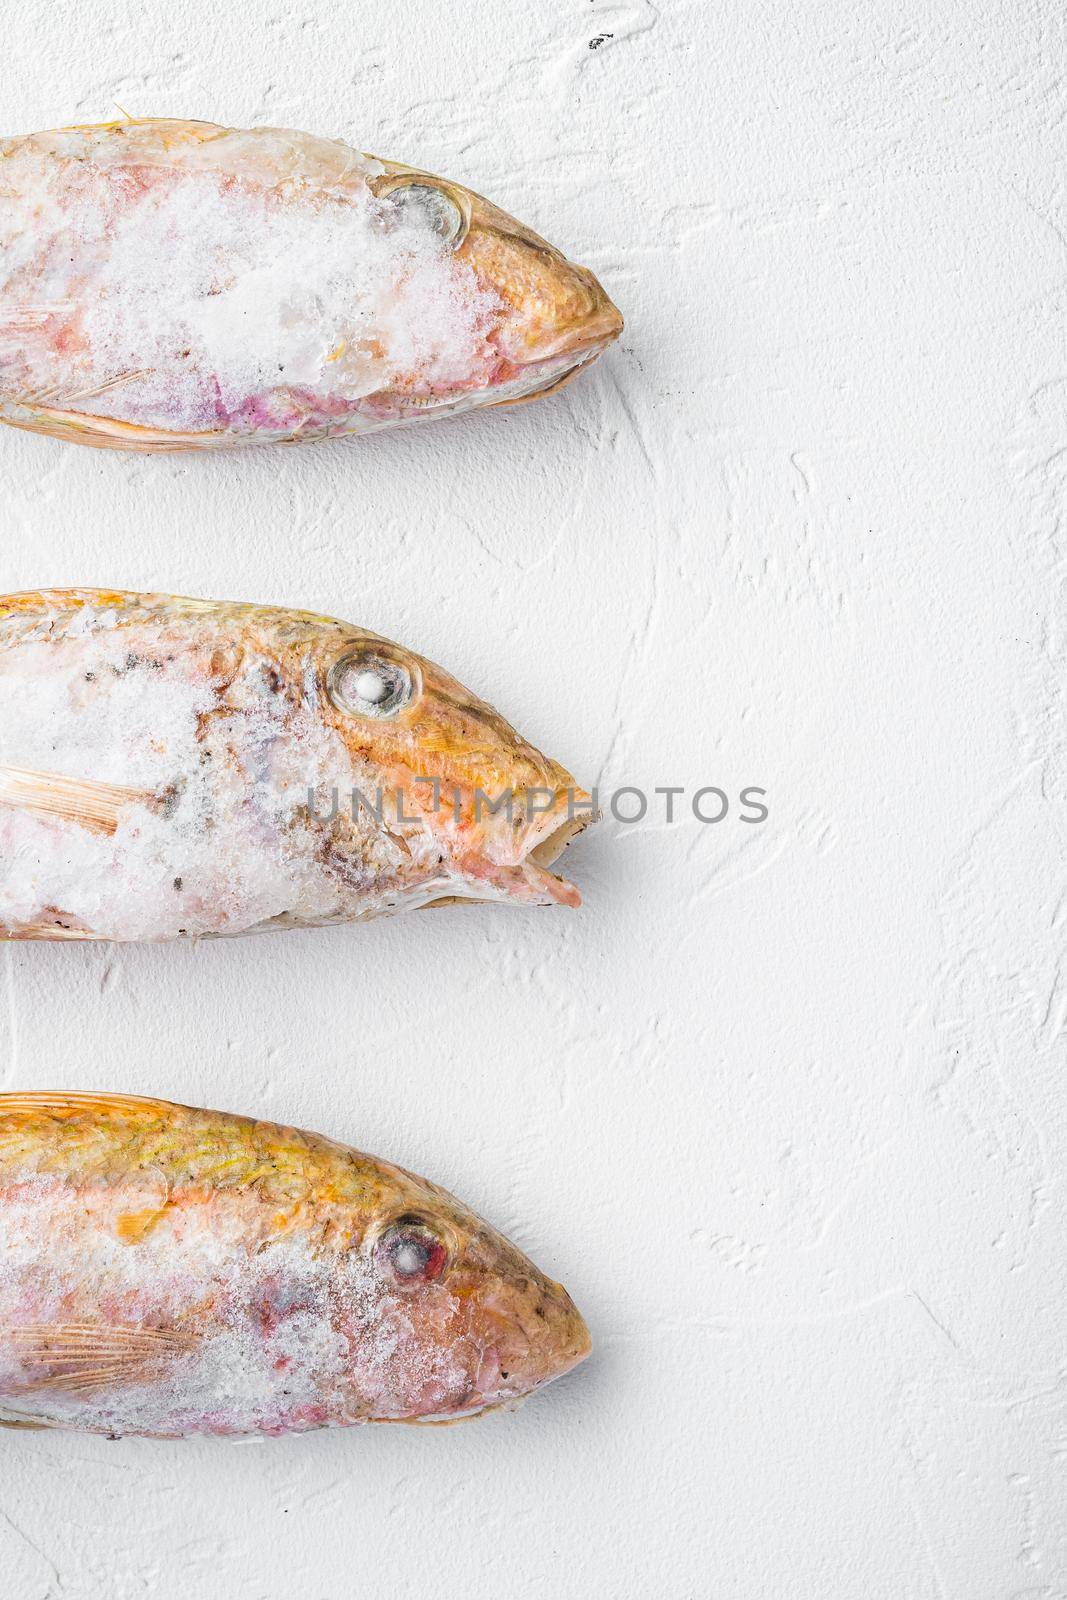 Frozen Goatfish raw fish, on white stone table background, top view flat lay , with copy space for text by Ilianesolenyi